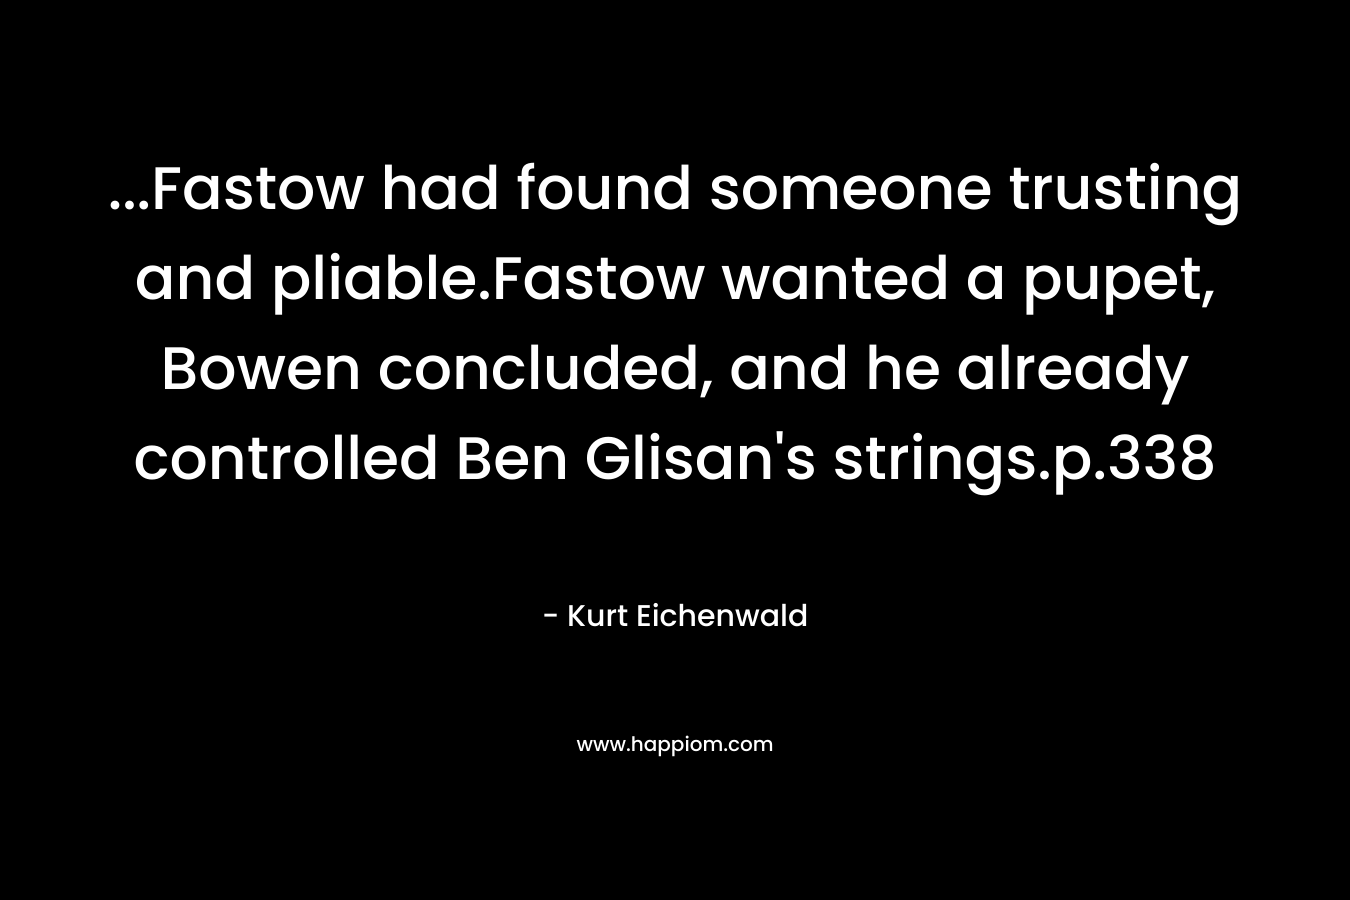 …Fastow had found someone trusting and pliable.Fastow wanted a pupet, Bowen concluded, and he already controlled Ben Glisan’s strings.p.338 – Kurt Eichenwald